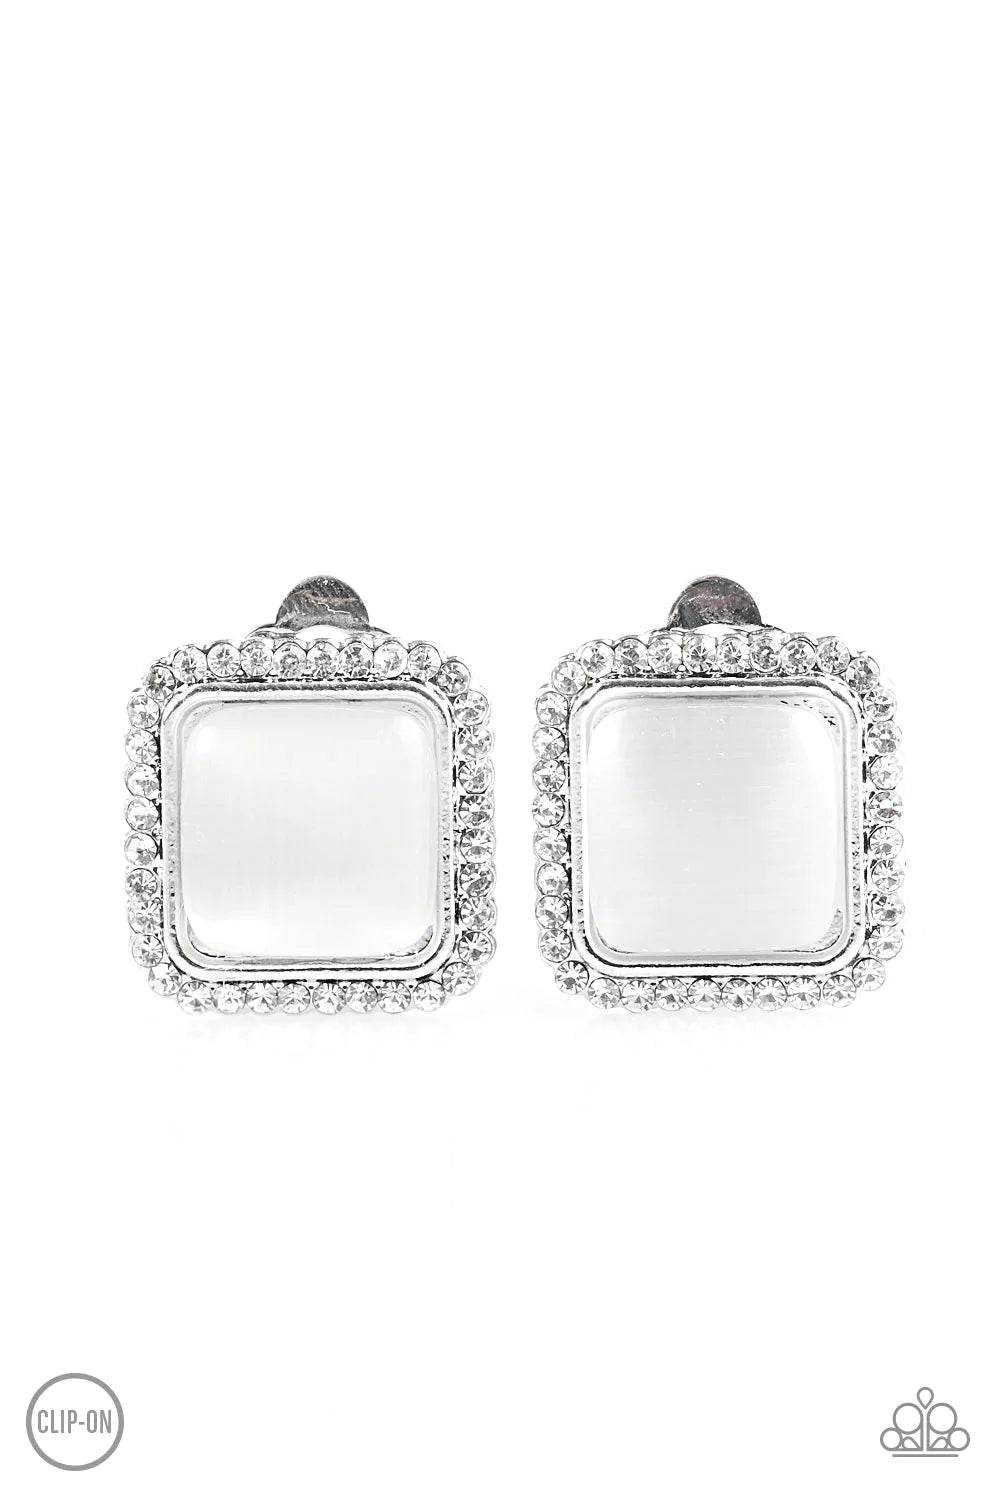 DEW WHAT I DEW - WHITE CLIP-ON EARRINGS